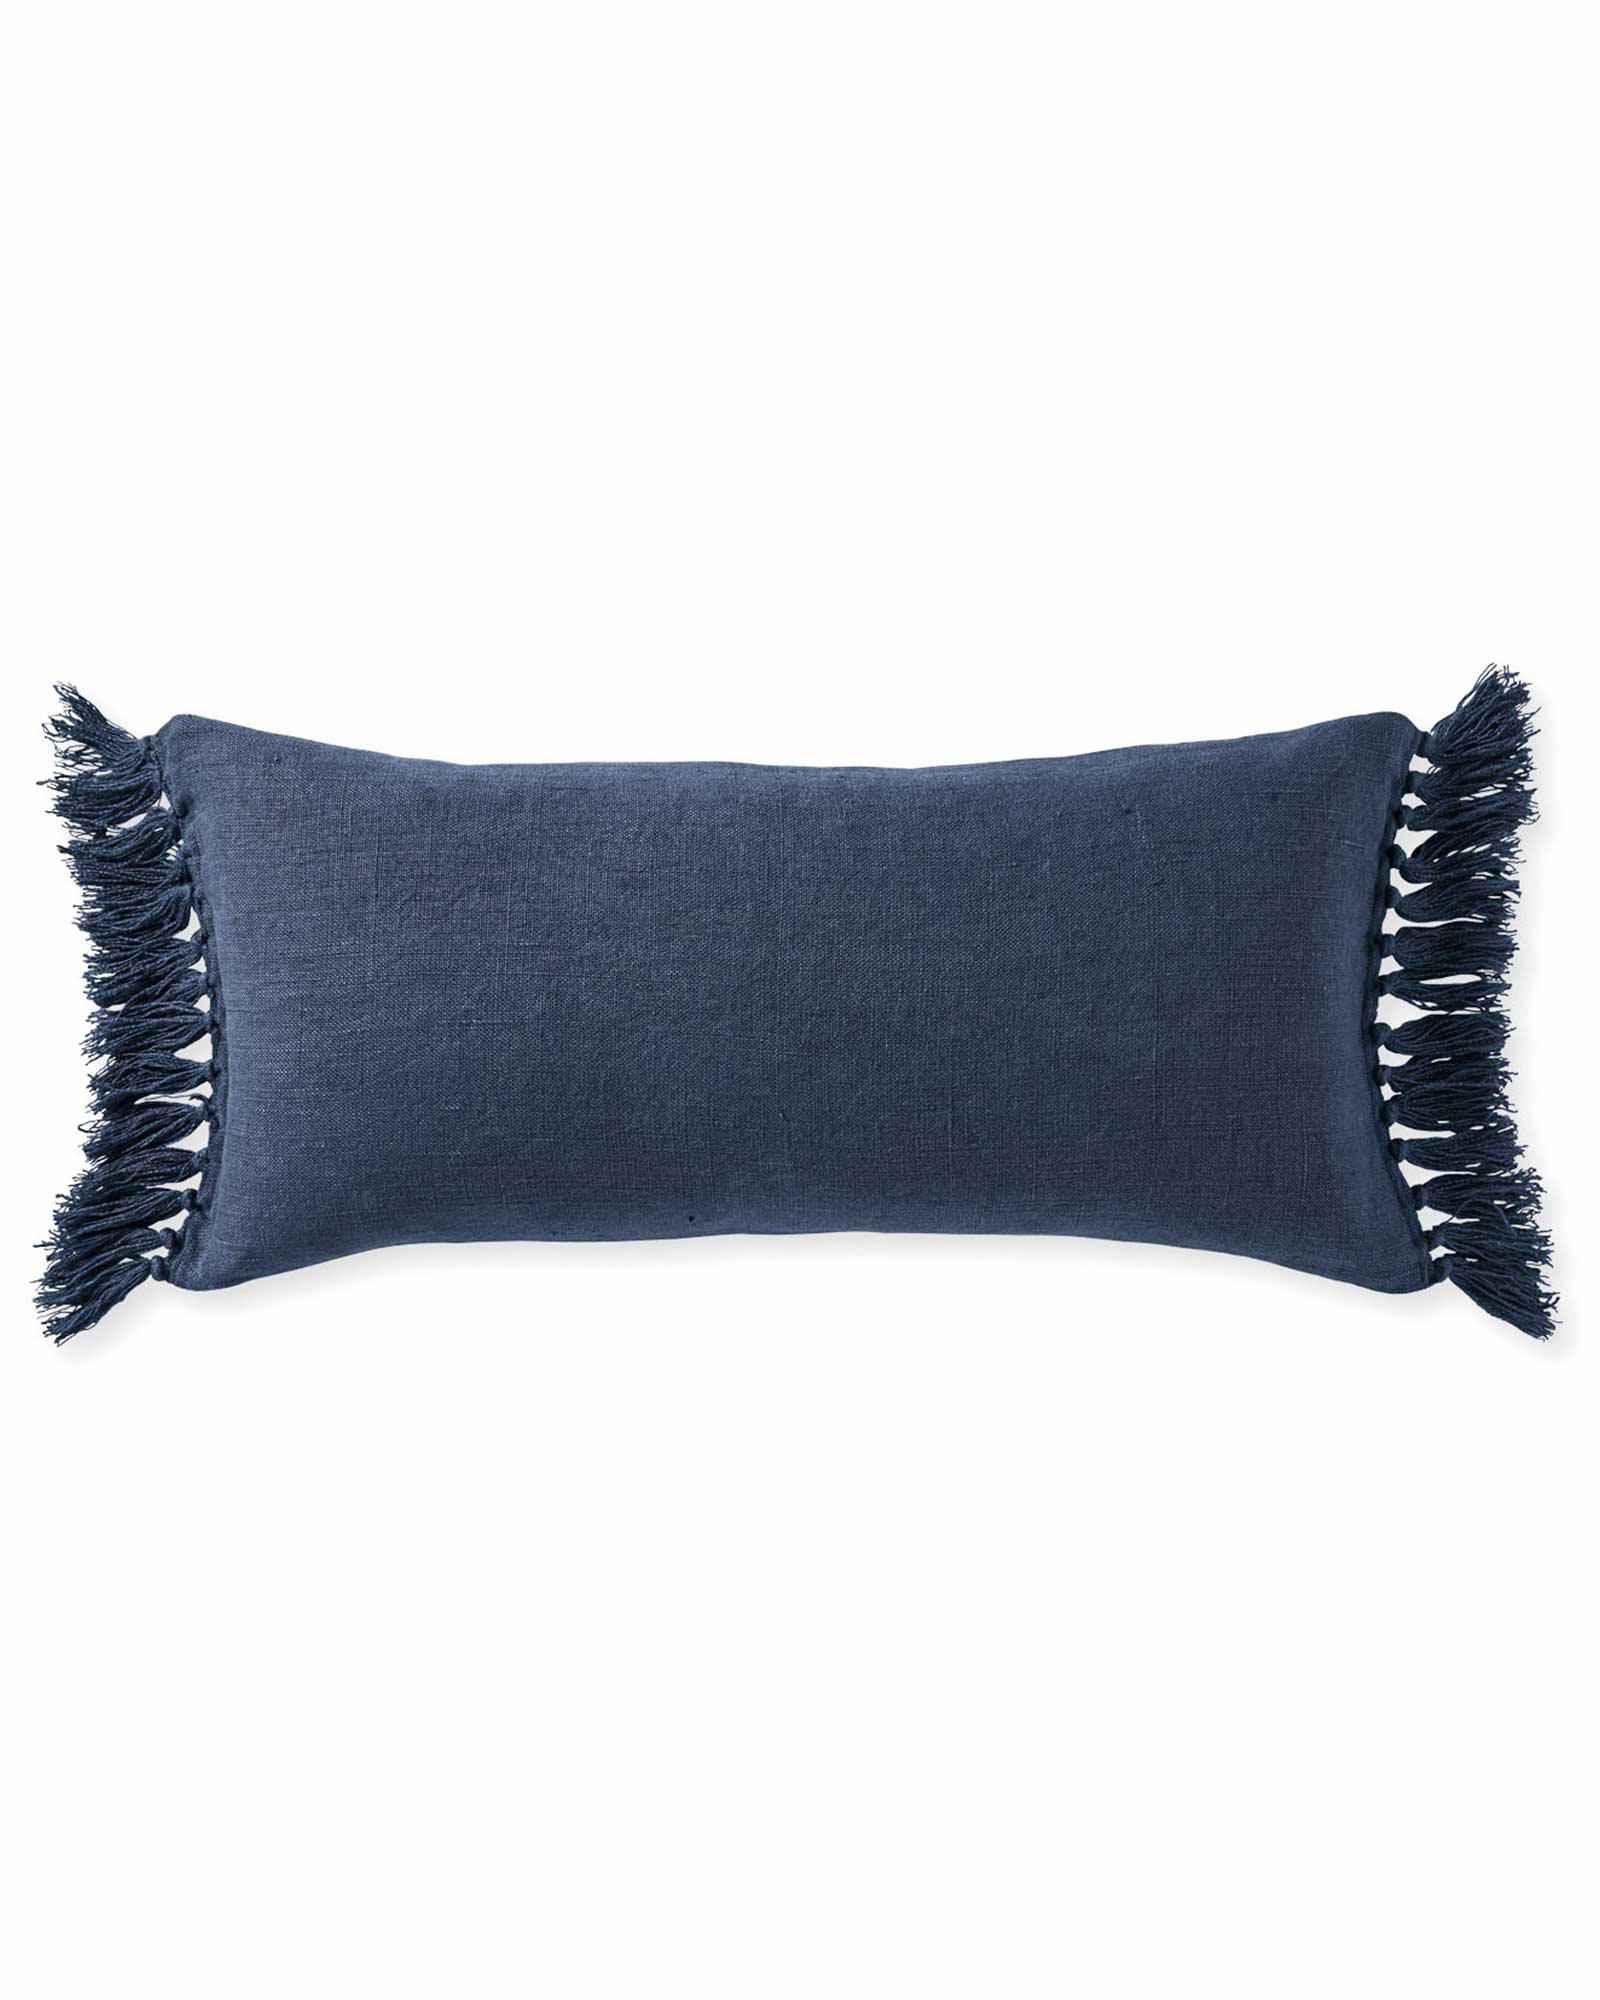 Mendocino Pillow Cover | Serena and Lily